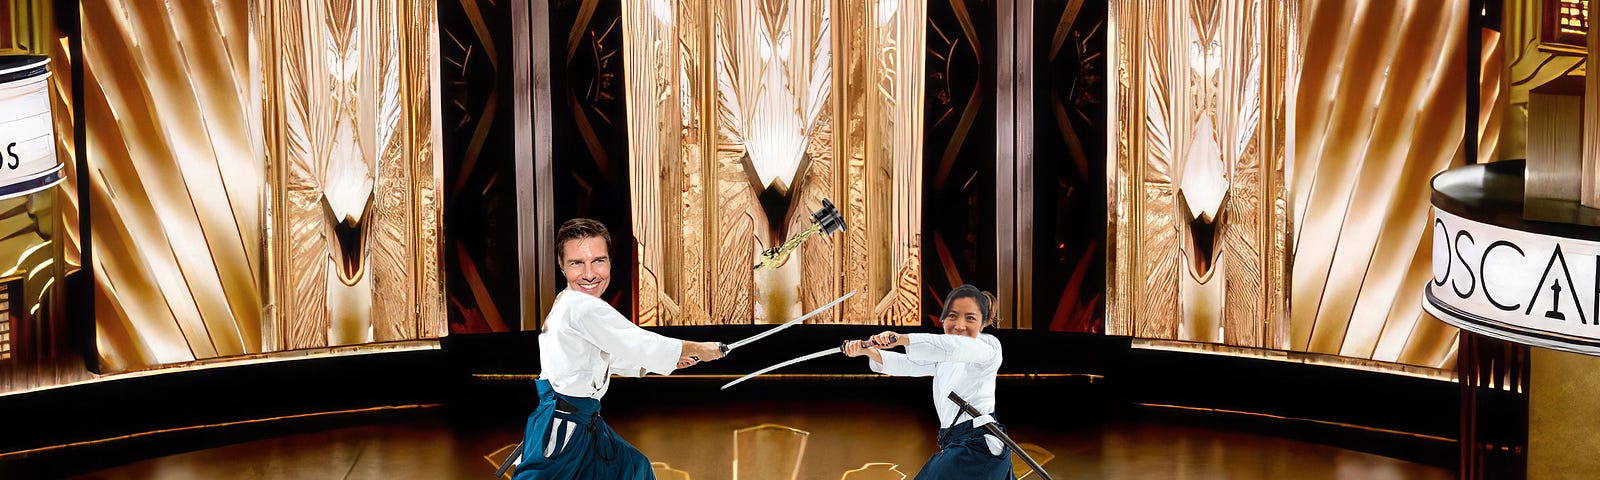 Tom Cruise and Michelle Yeoh sword fighting